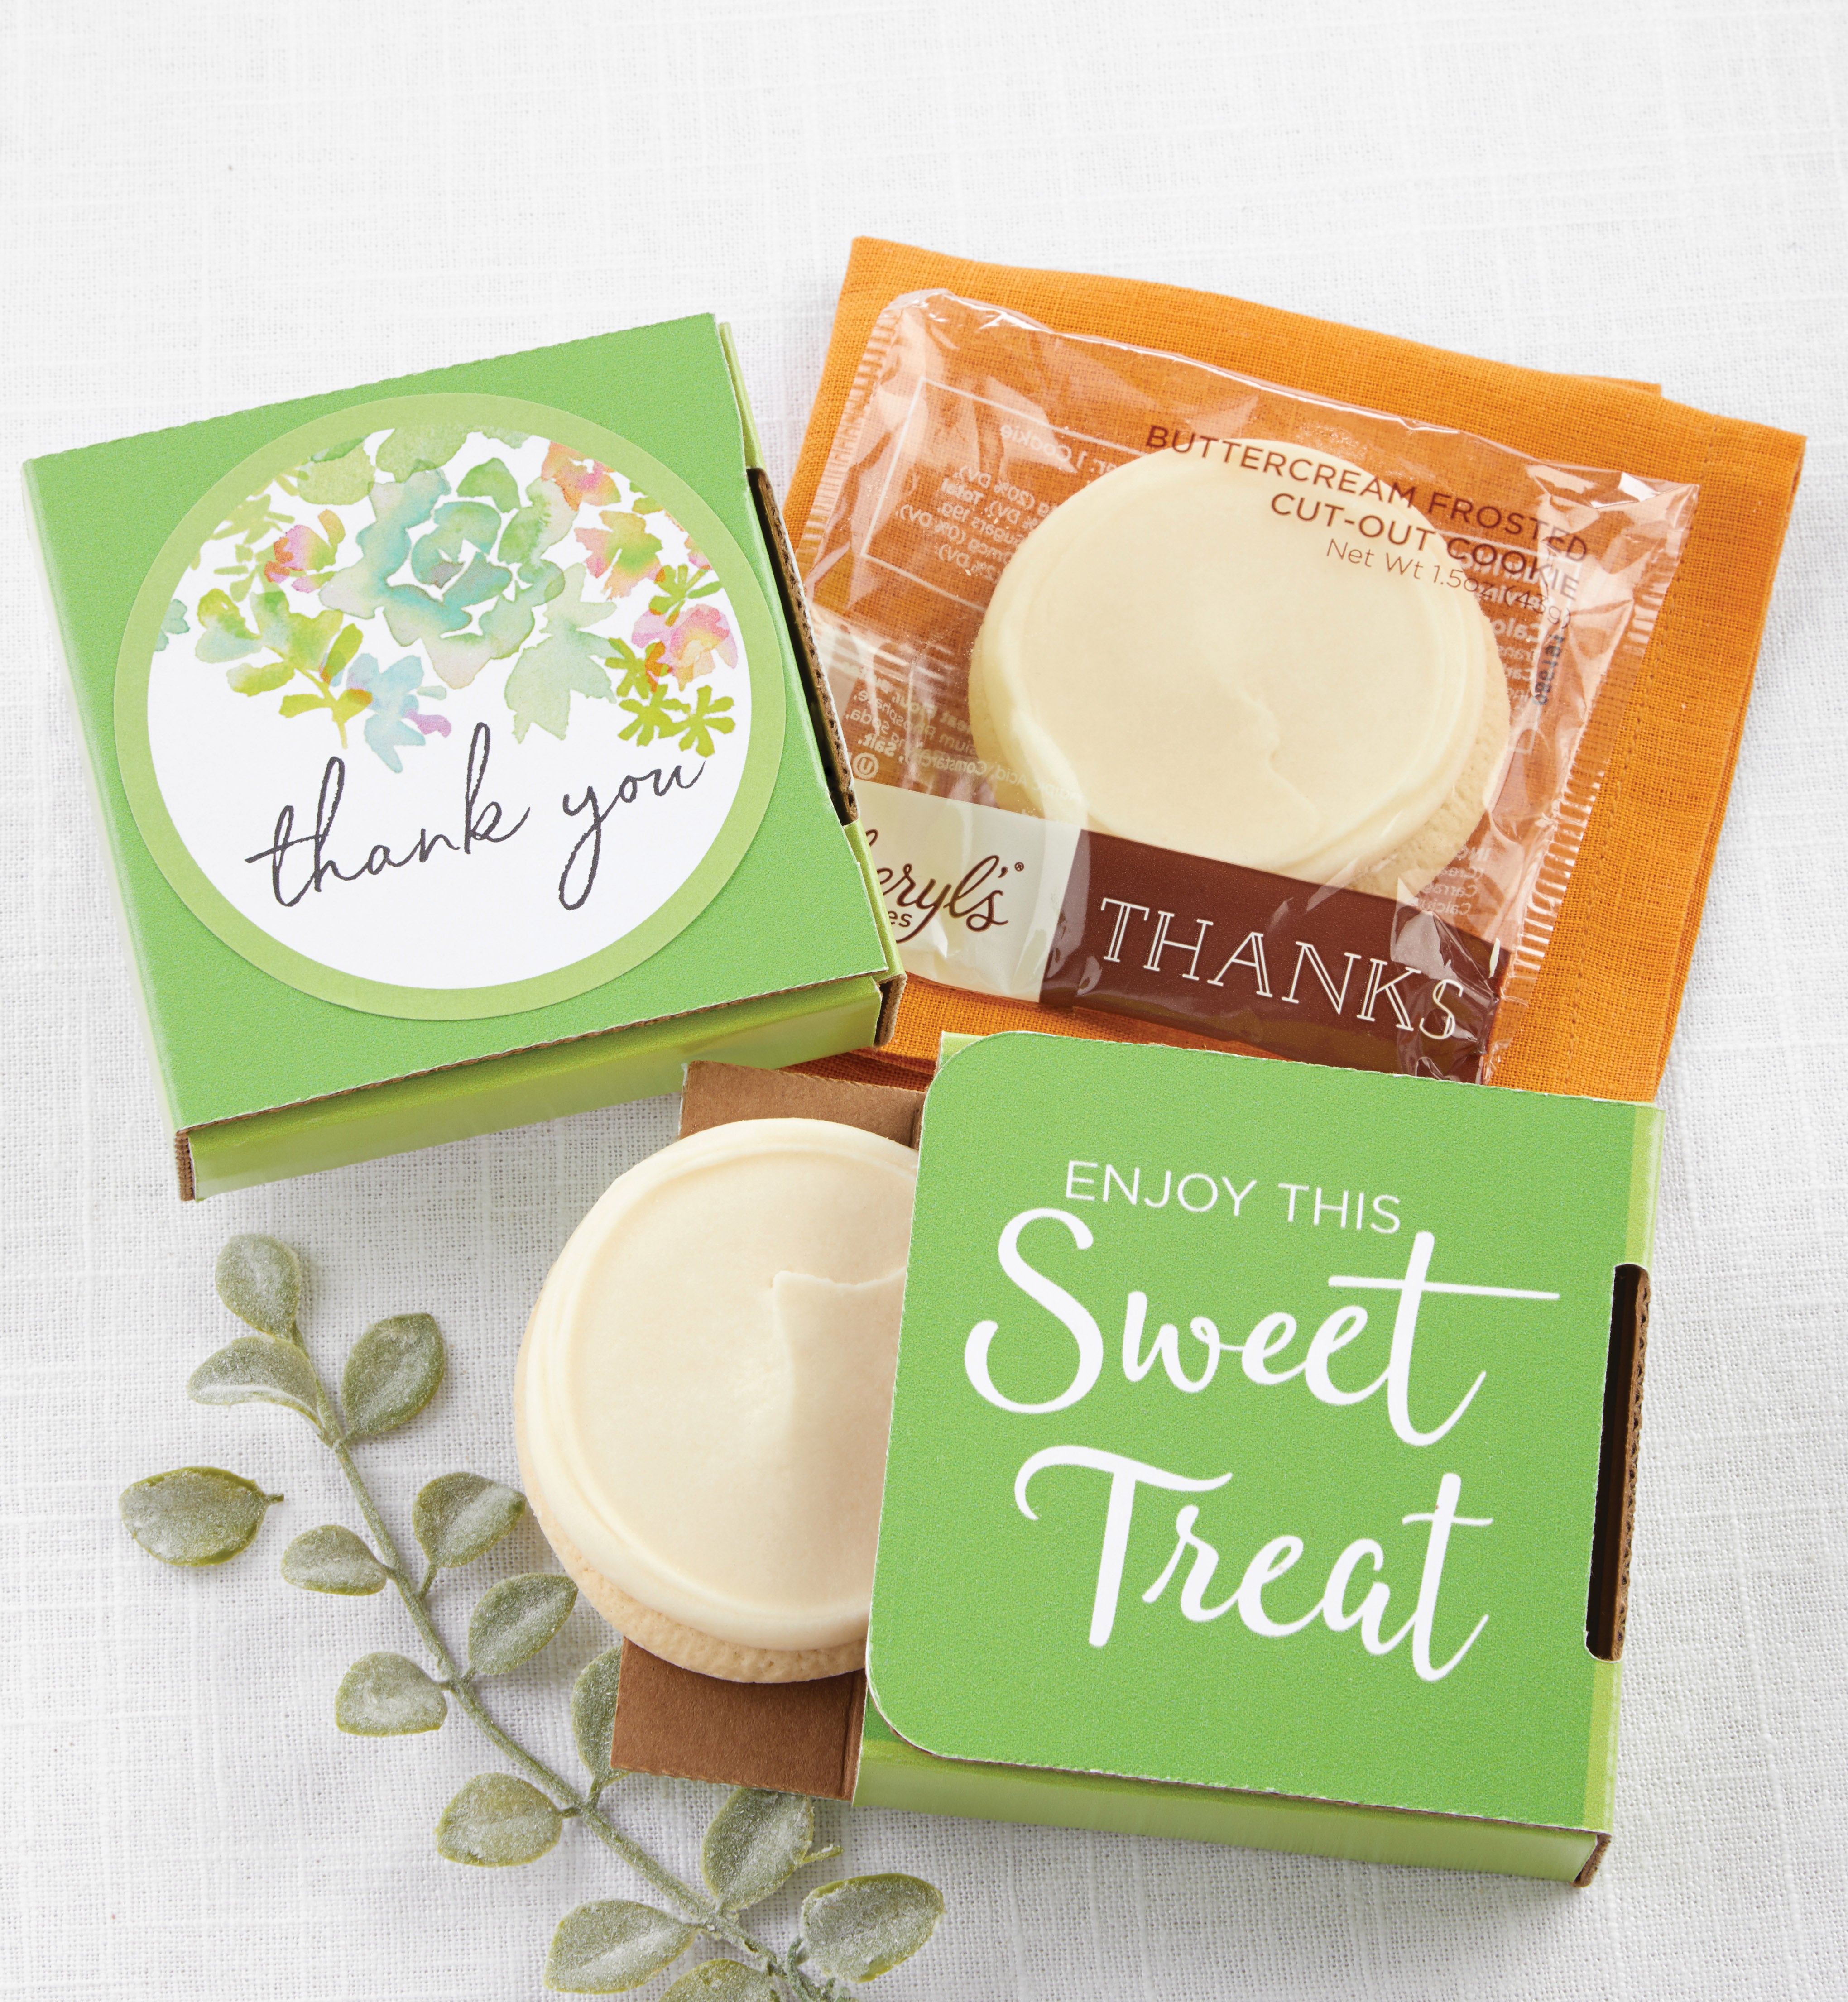 Cheryl's Thank You Cookie Card